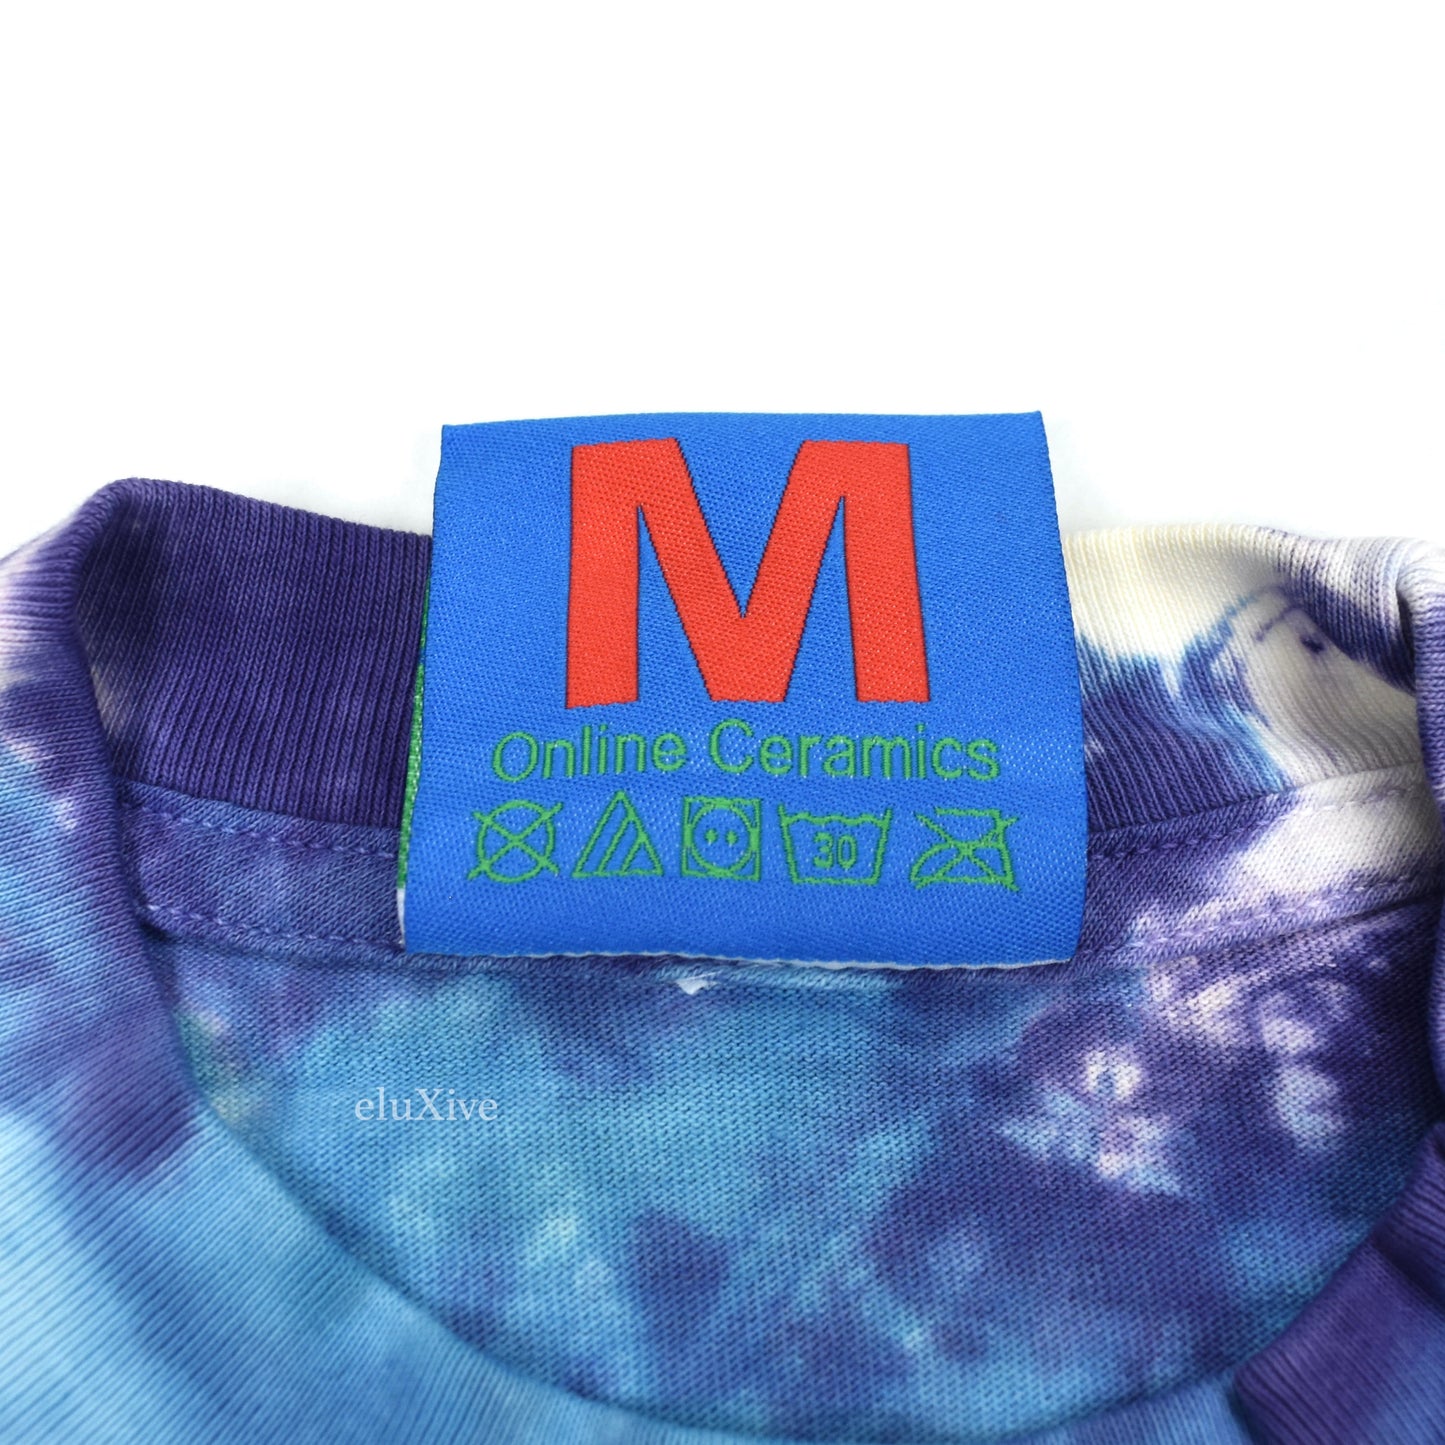 Online Ceramics - What On Earth Are We Doing Tie-Dye T-Shirt (Blue)